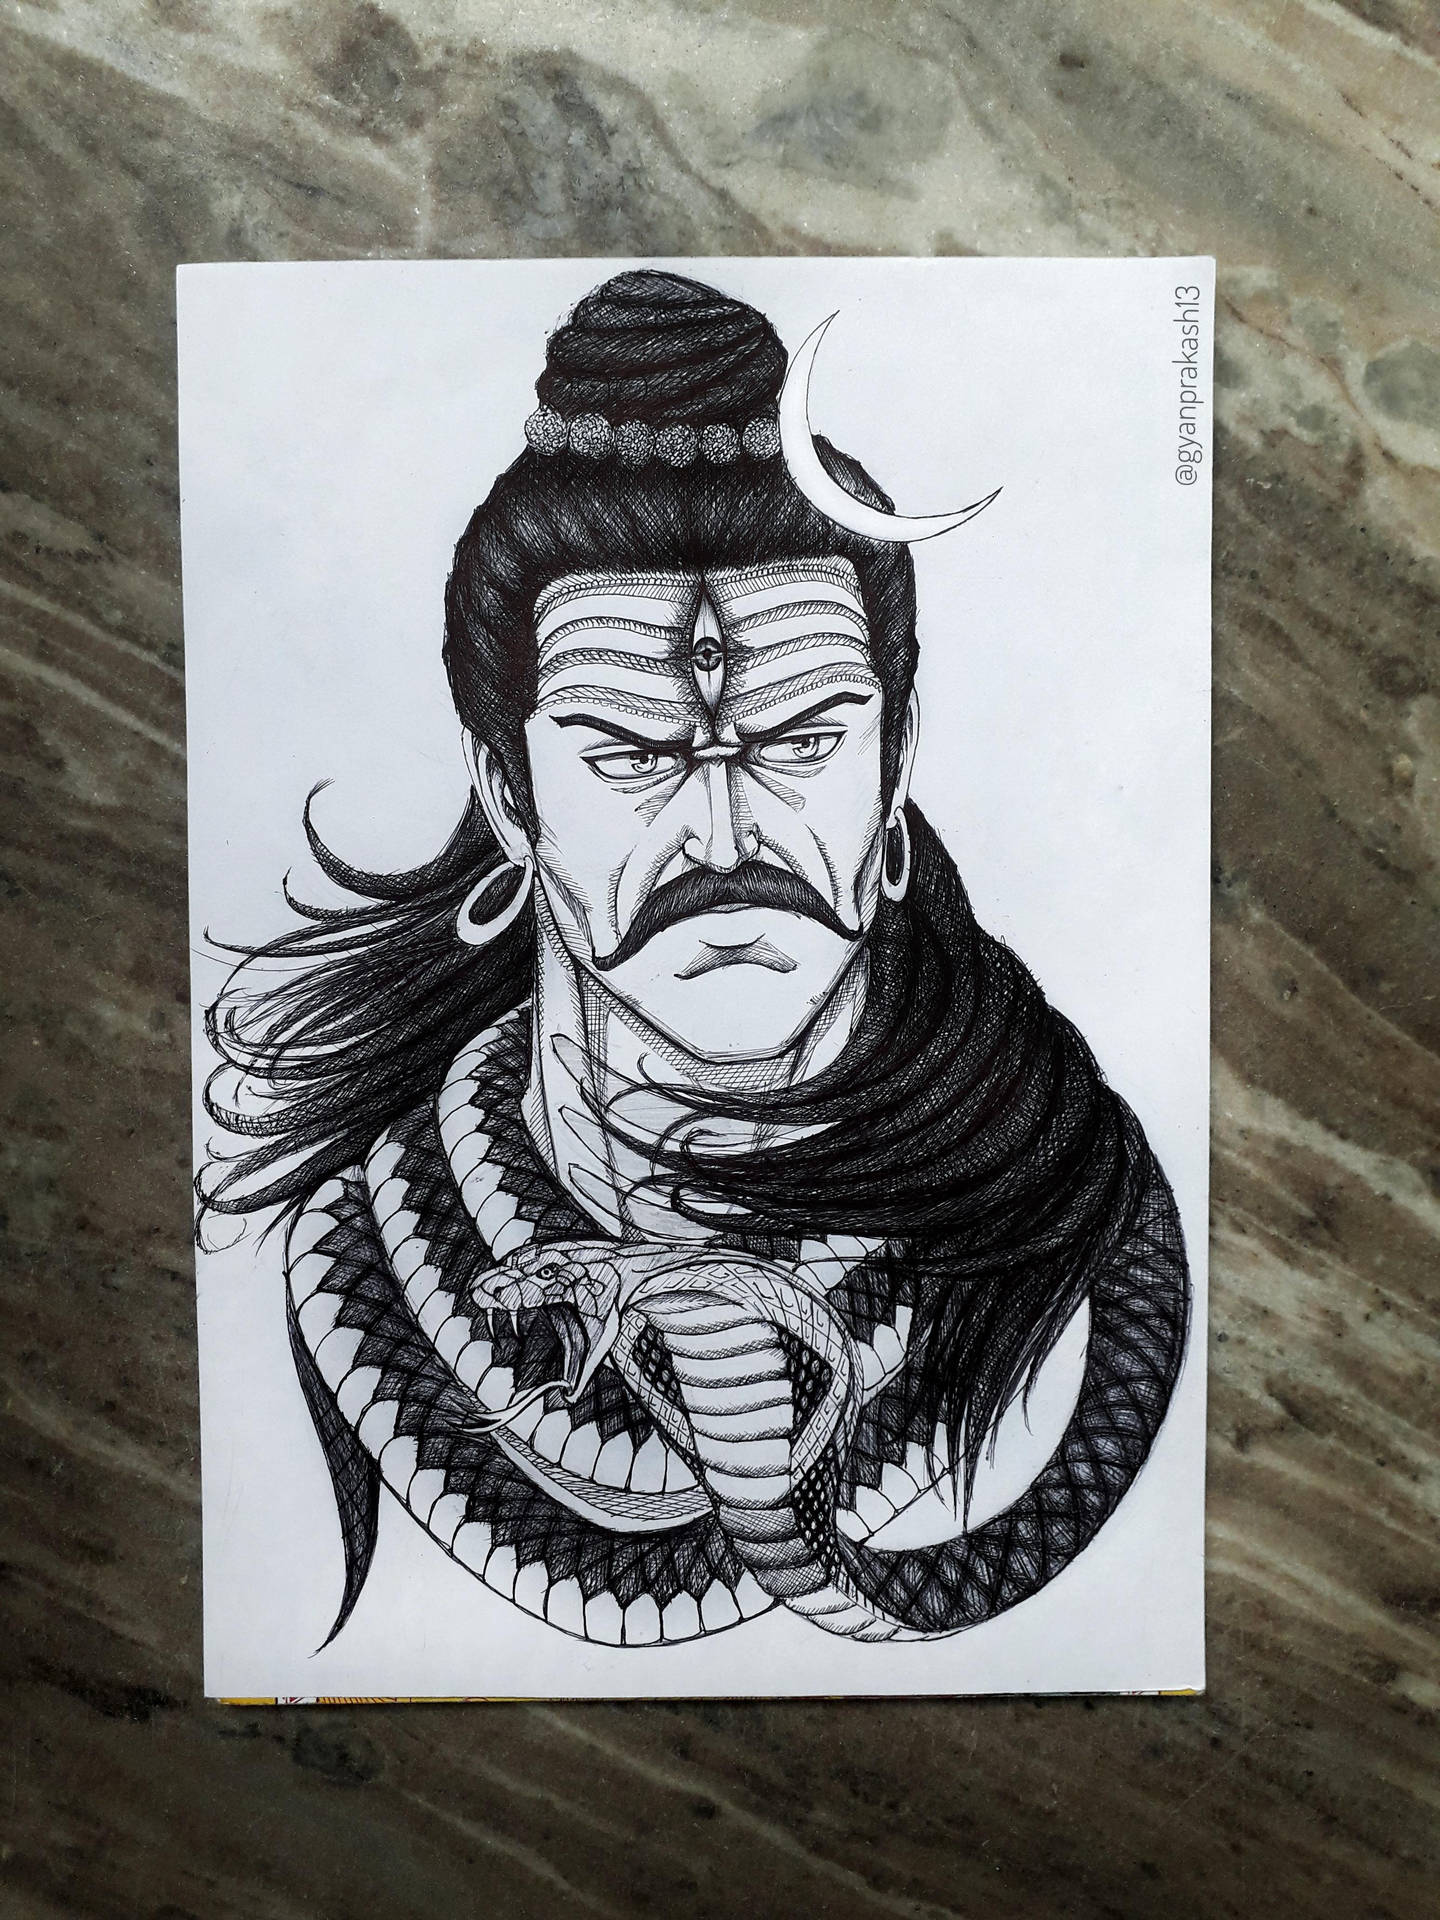 Bigg Boss Marathi 4's Ruchira Jadhav shares a picture of her charcoal sketch  of Lord Shiva on Mahashivratri - Times of India